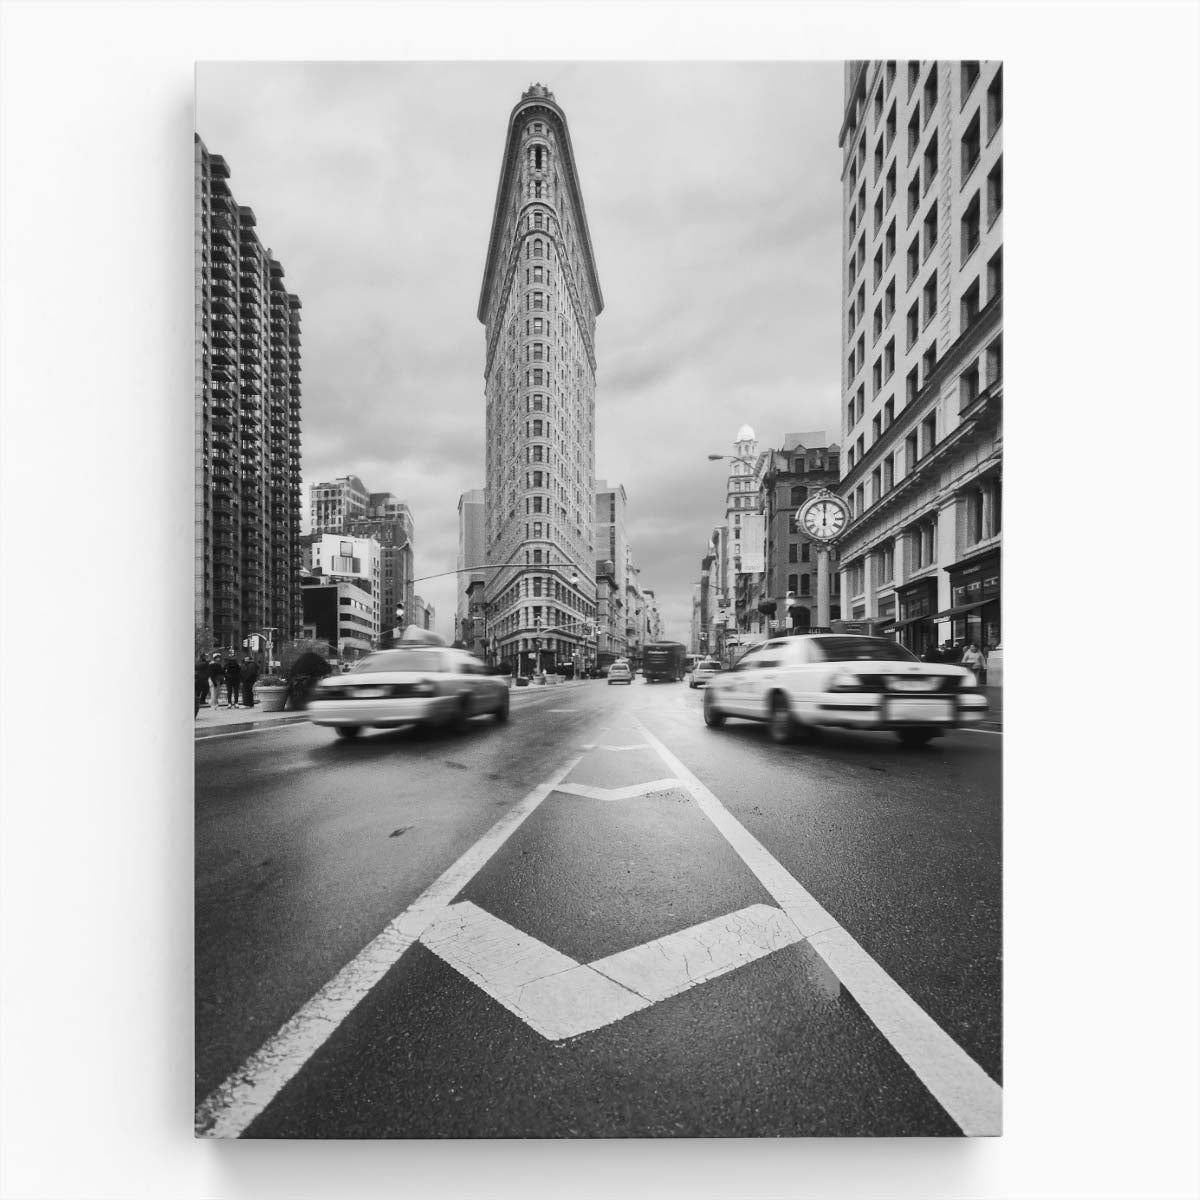 Flatiron Building NYC Taxi Street Photography - Monochrome Urban Metropolis by Luxuriance Designs, made in USA